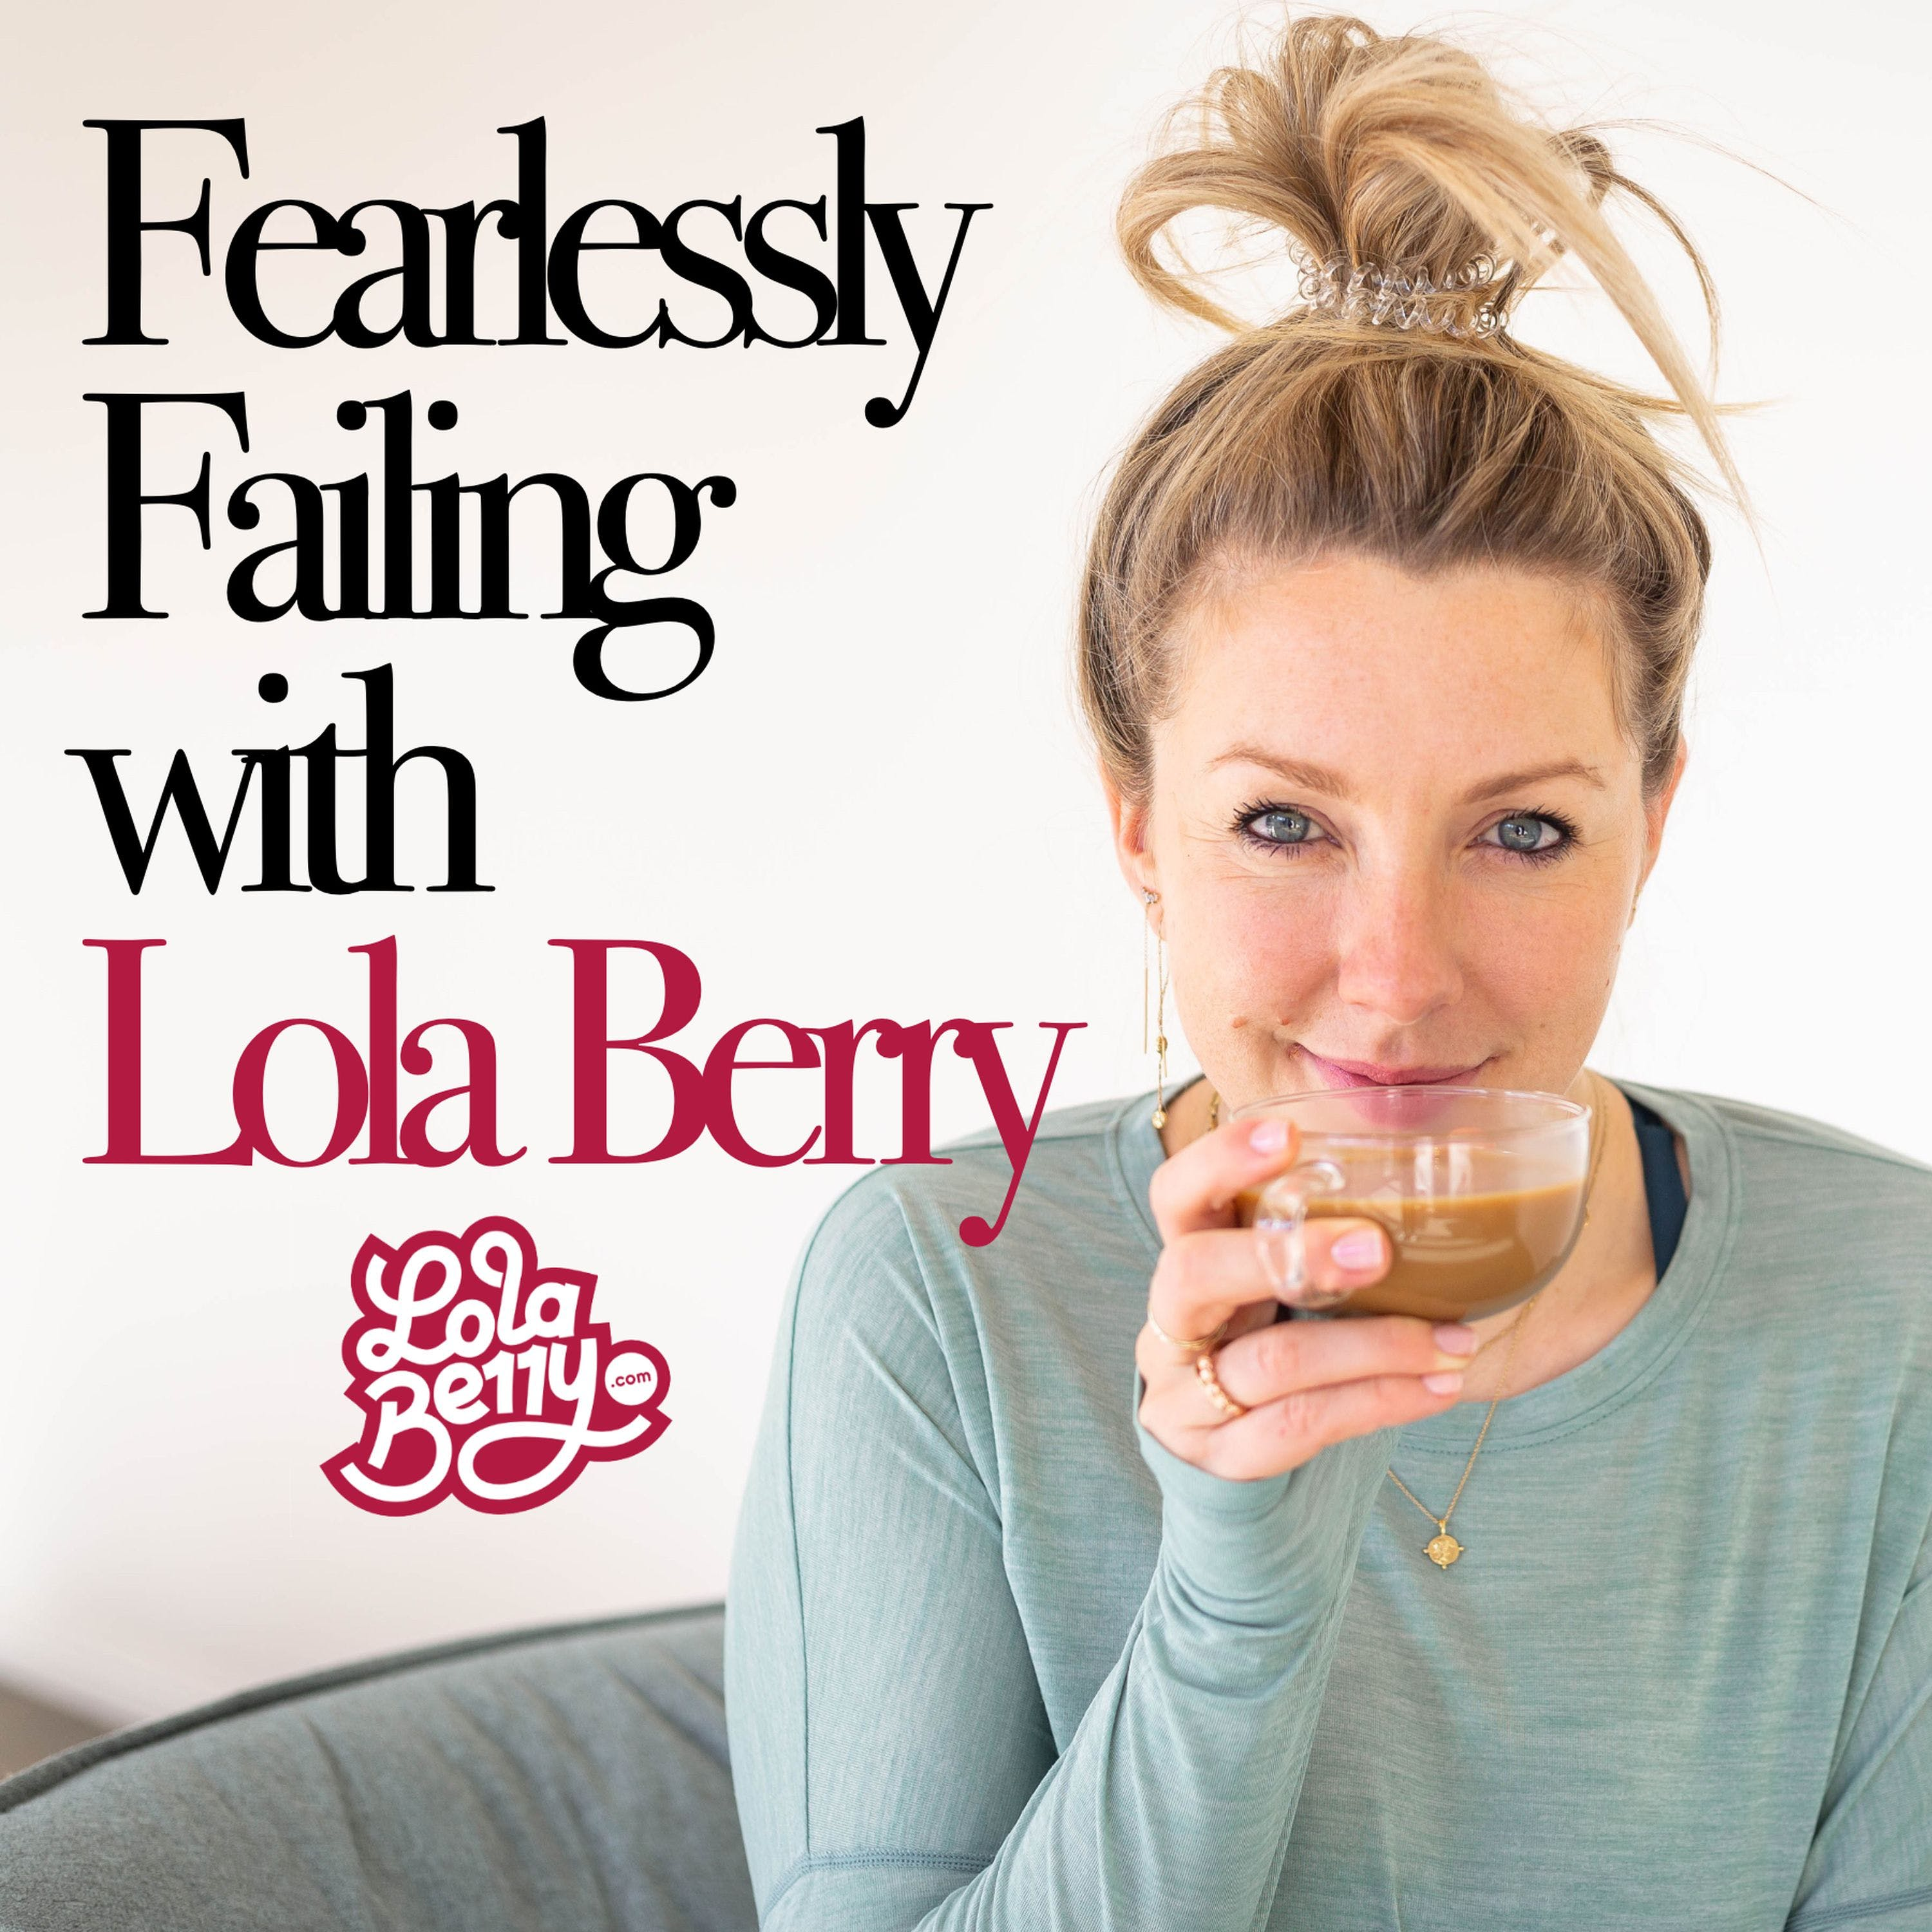 48. Fearlessly Failing: Bonnie Anderson